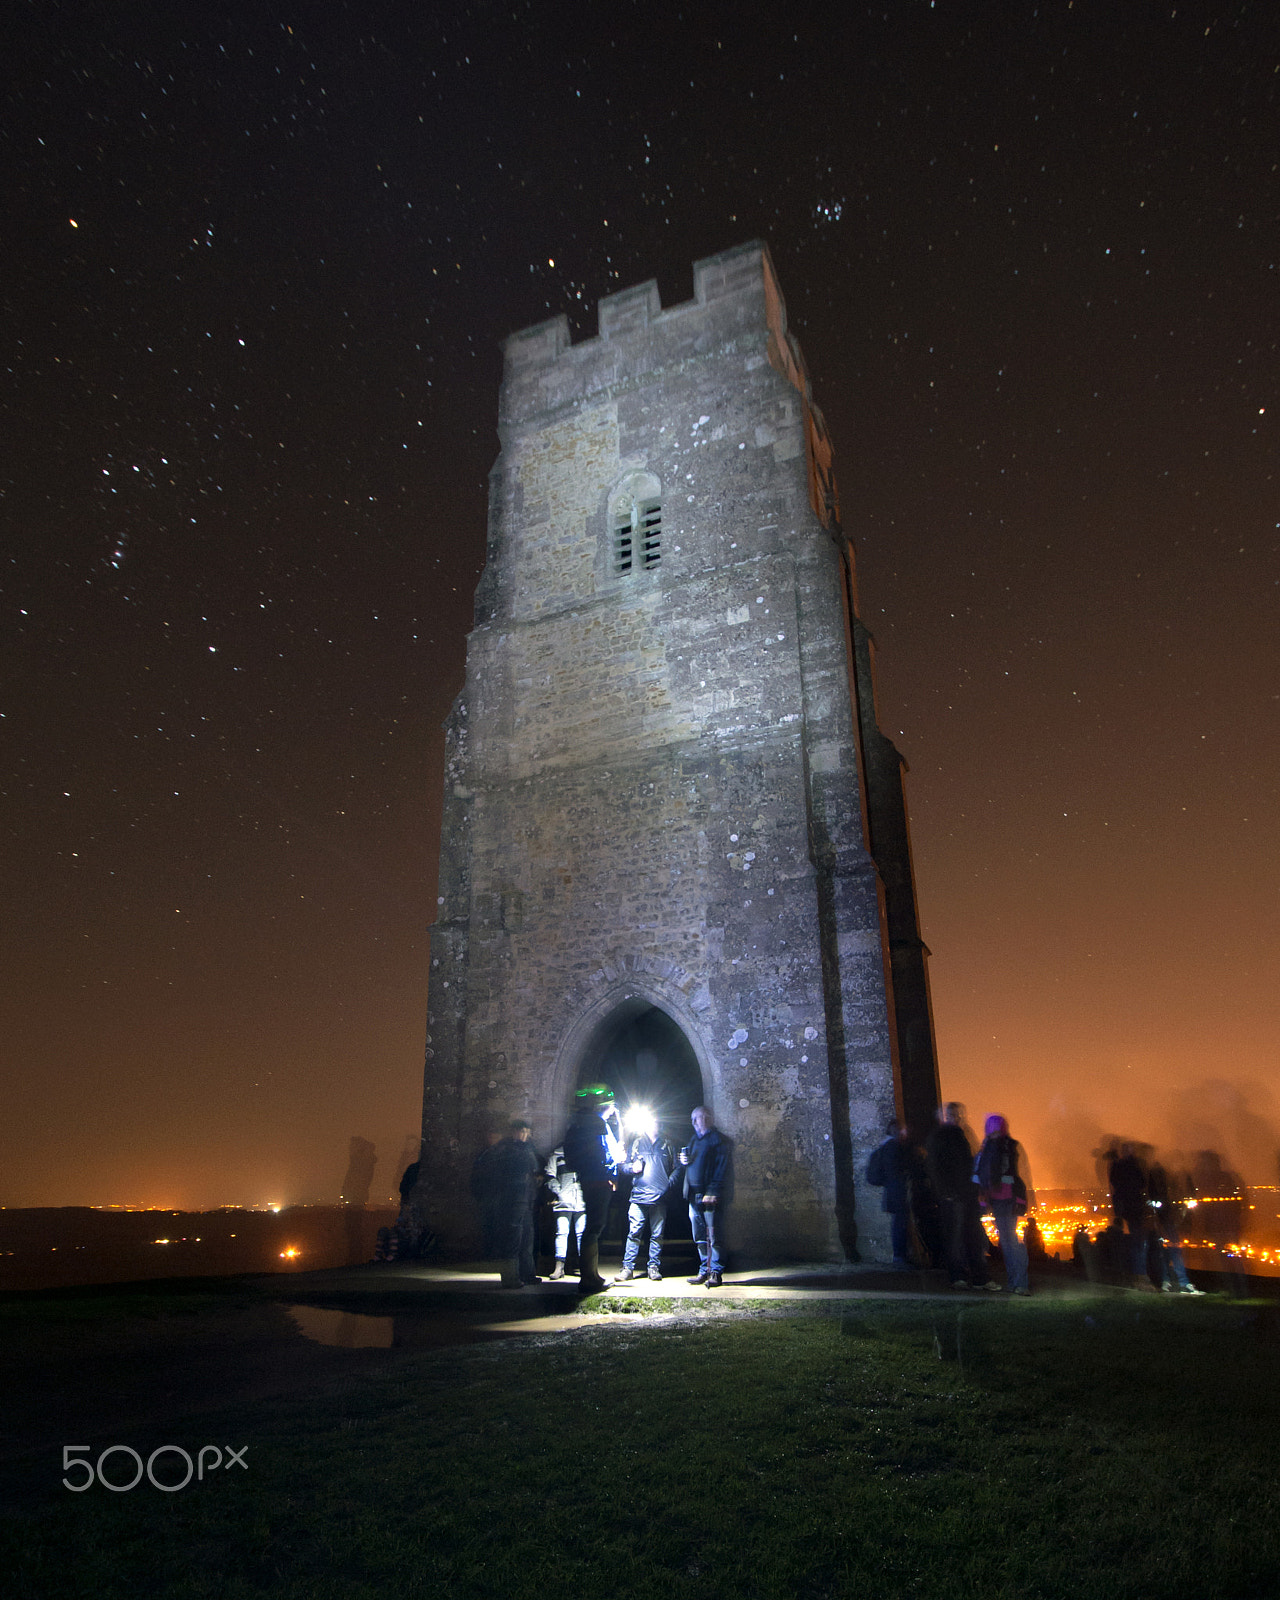 Nikon D800 + Tamron SP AF 10-24mm F3.5-4.5 Di II LD Aspherical (IF) sample photo. New years at glastonbury tor photography